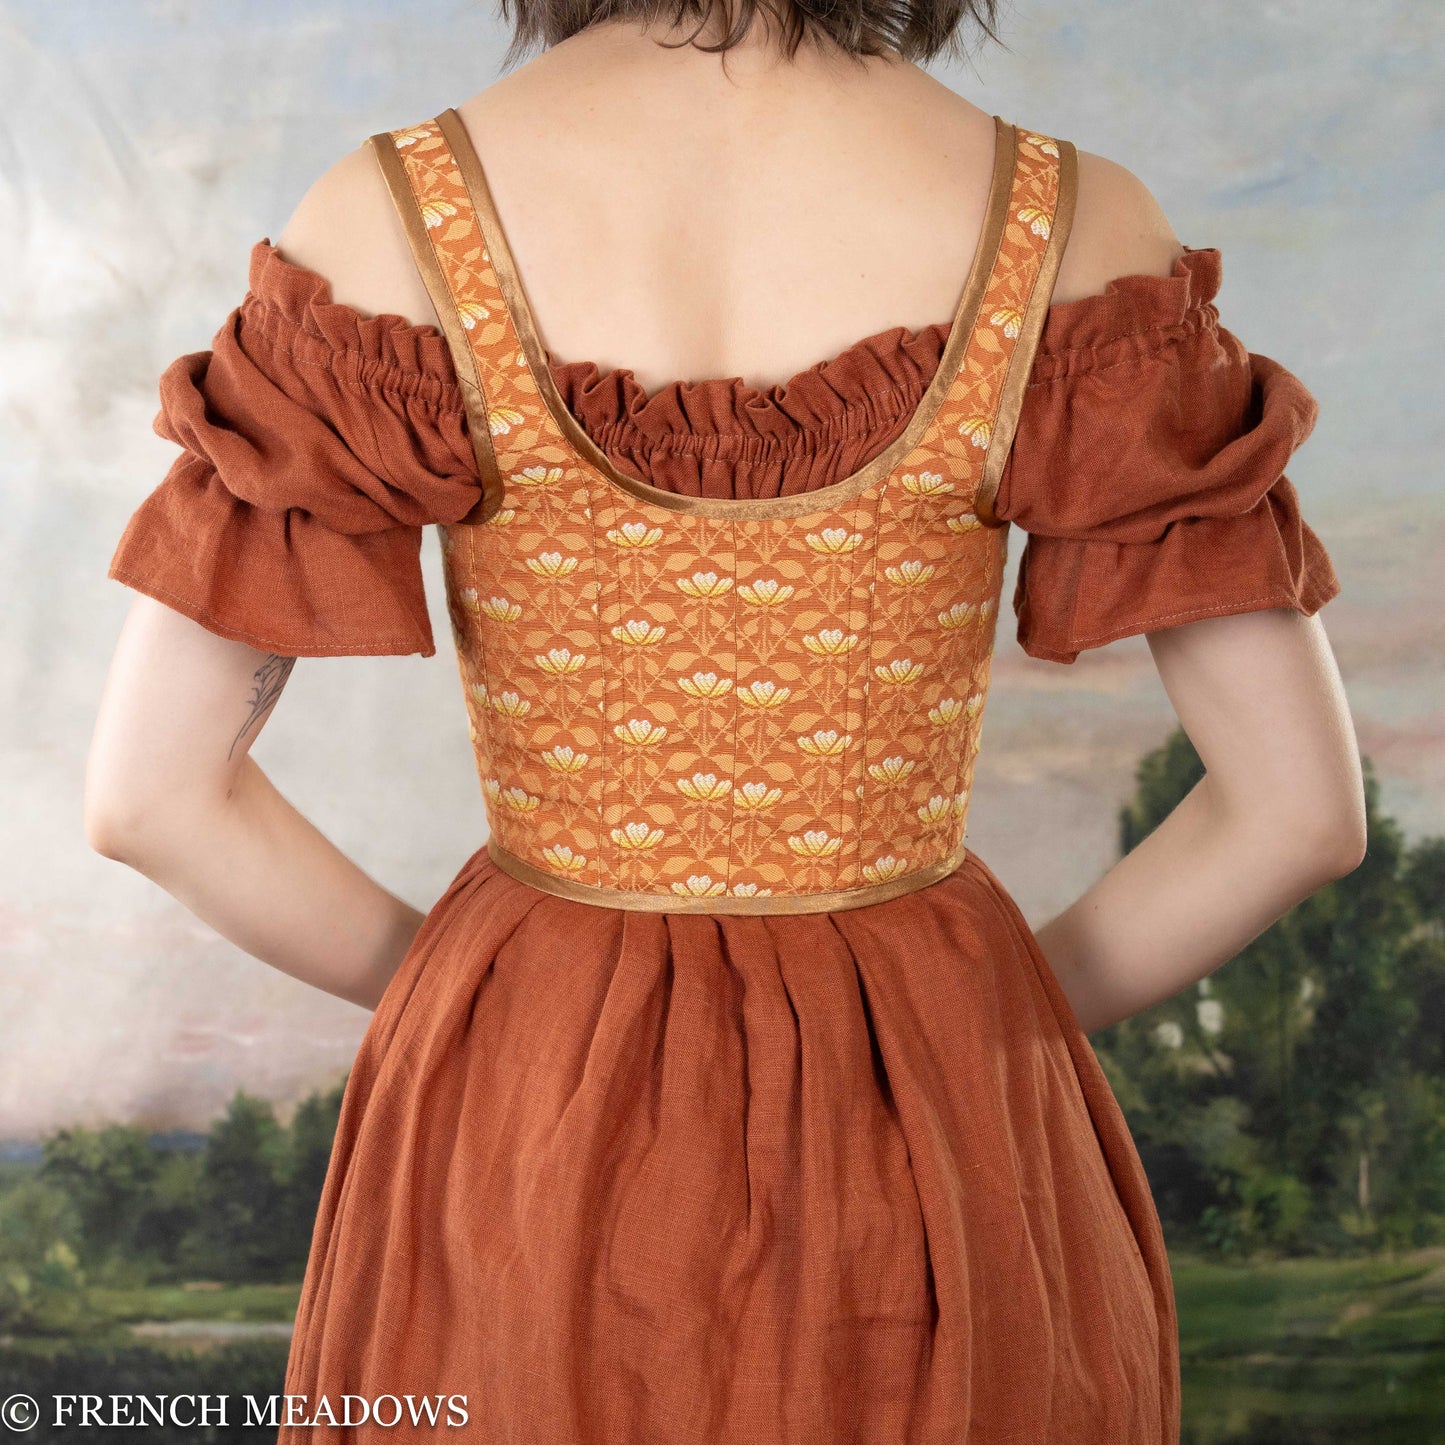 Load image into Gallery viewer, back view of a model wearing an orange corset dress
